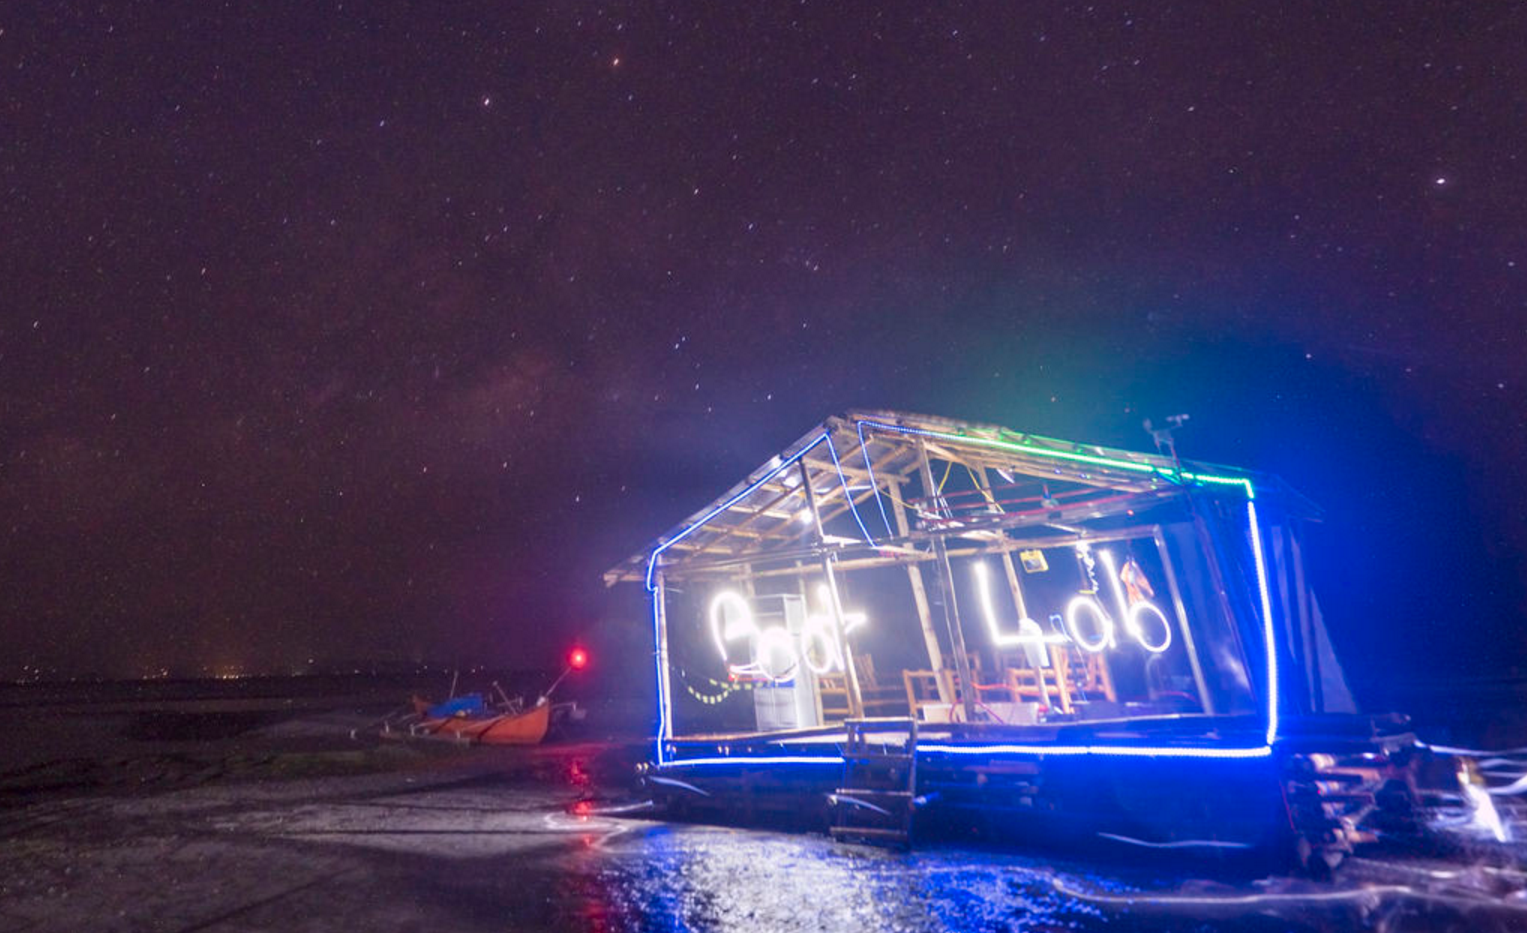 BOAT Lab and stars